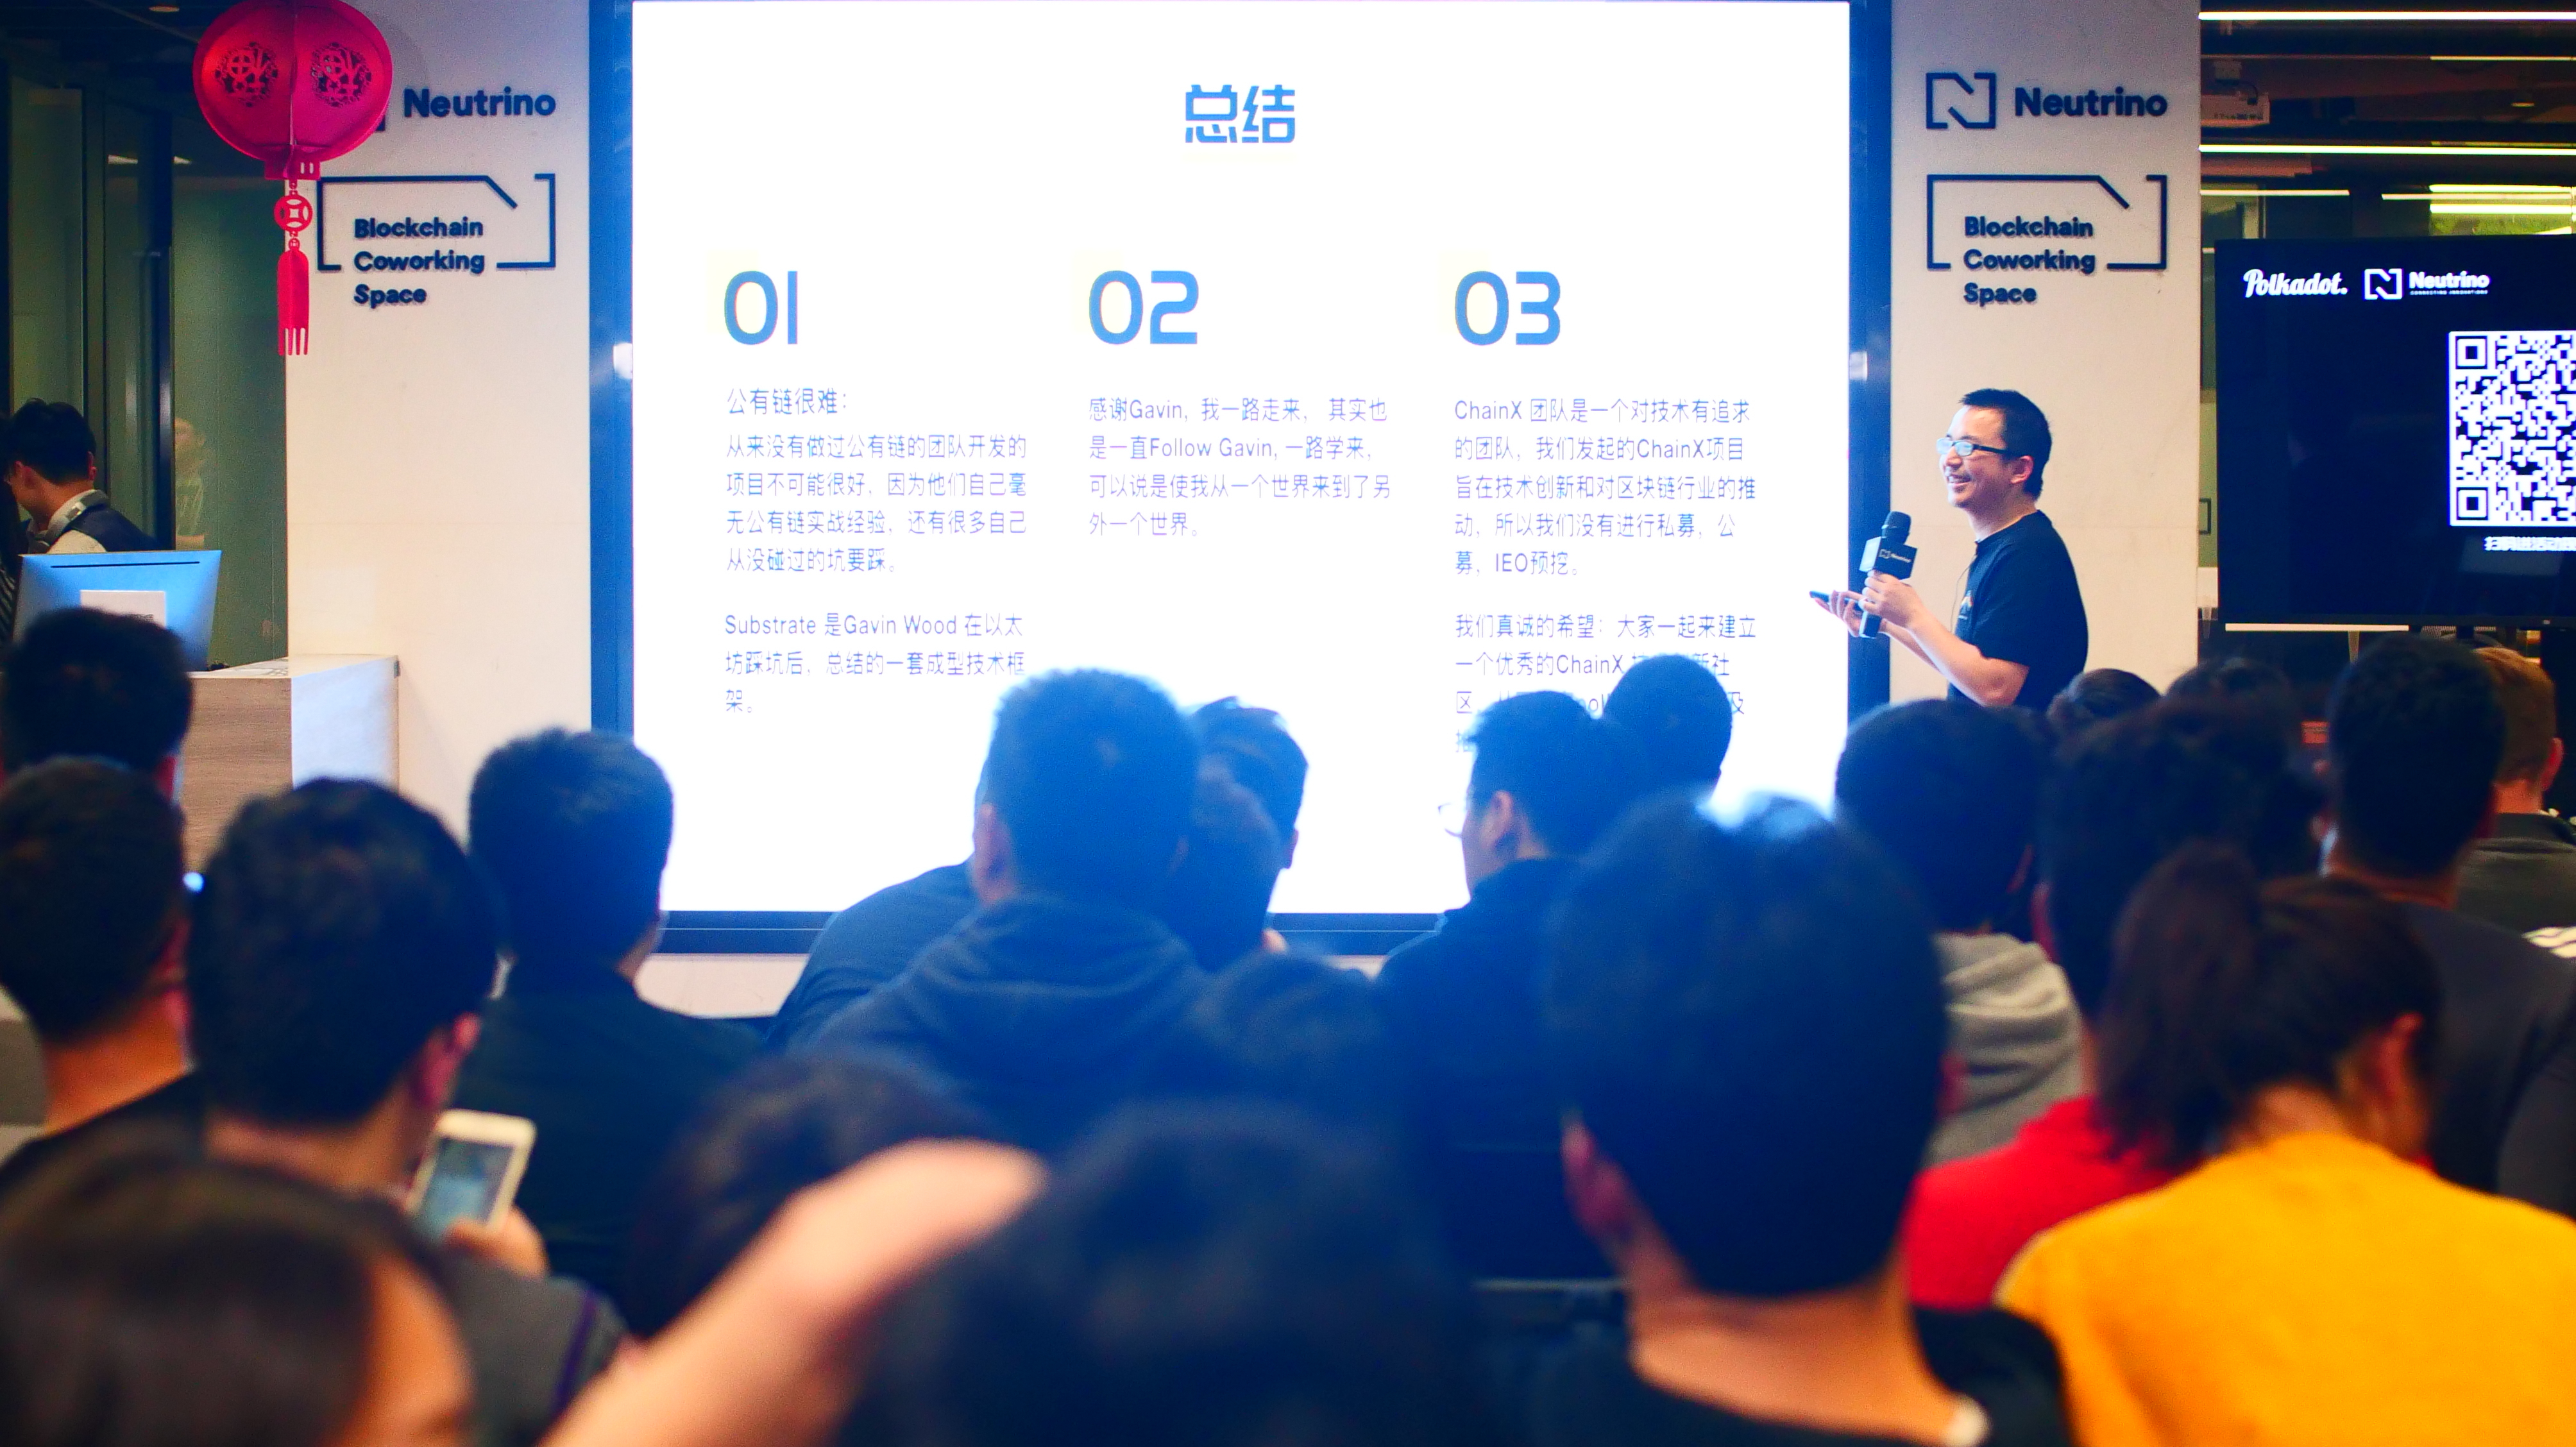 Polkadot Shanghai Review: Gavin Wood and other guests gave a speech on PPT